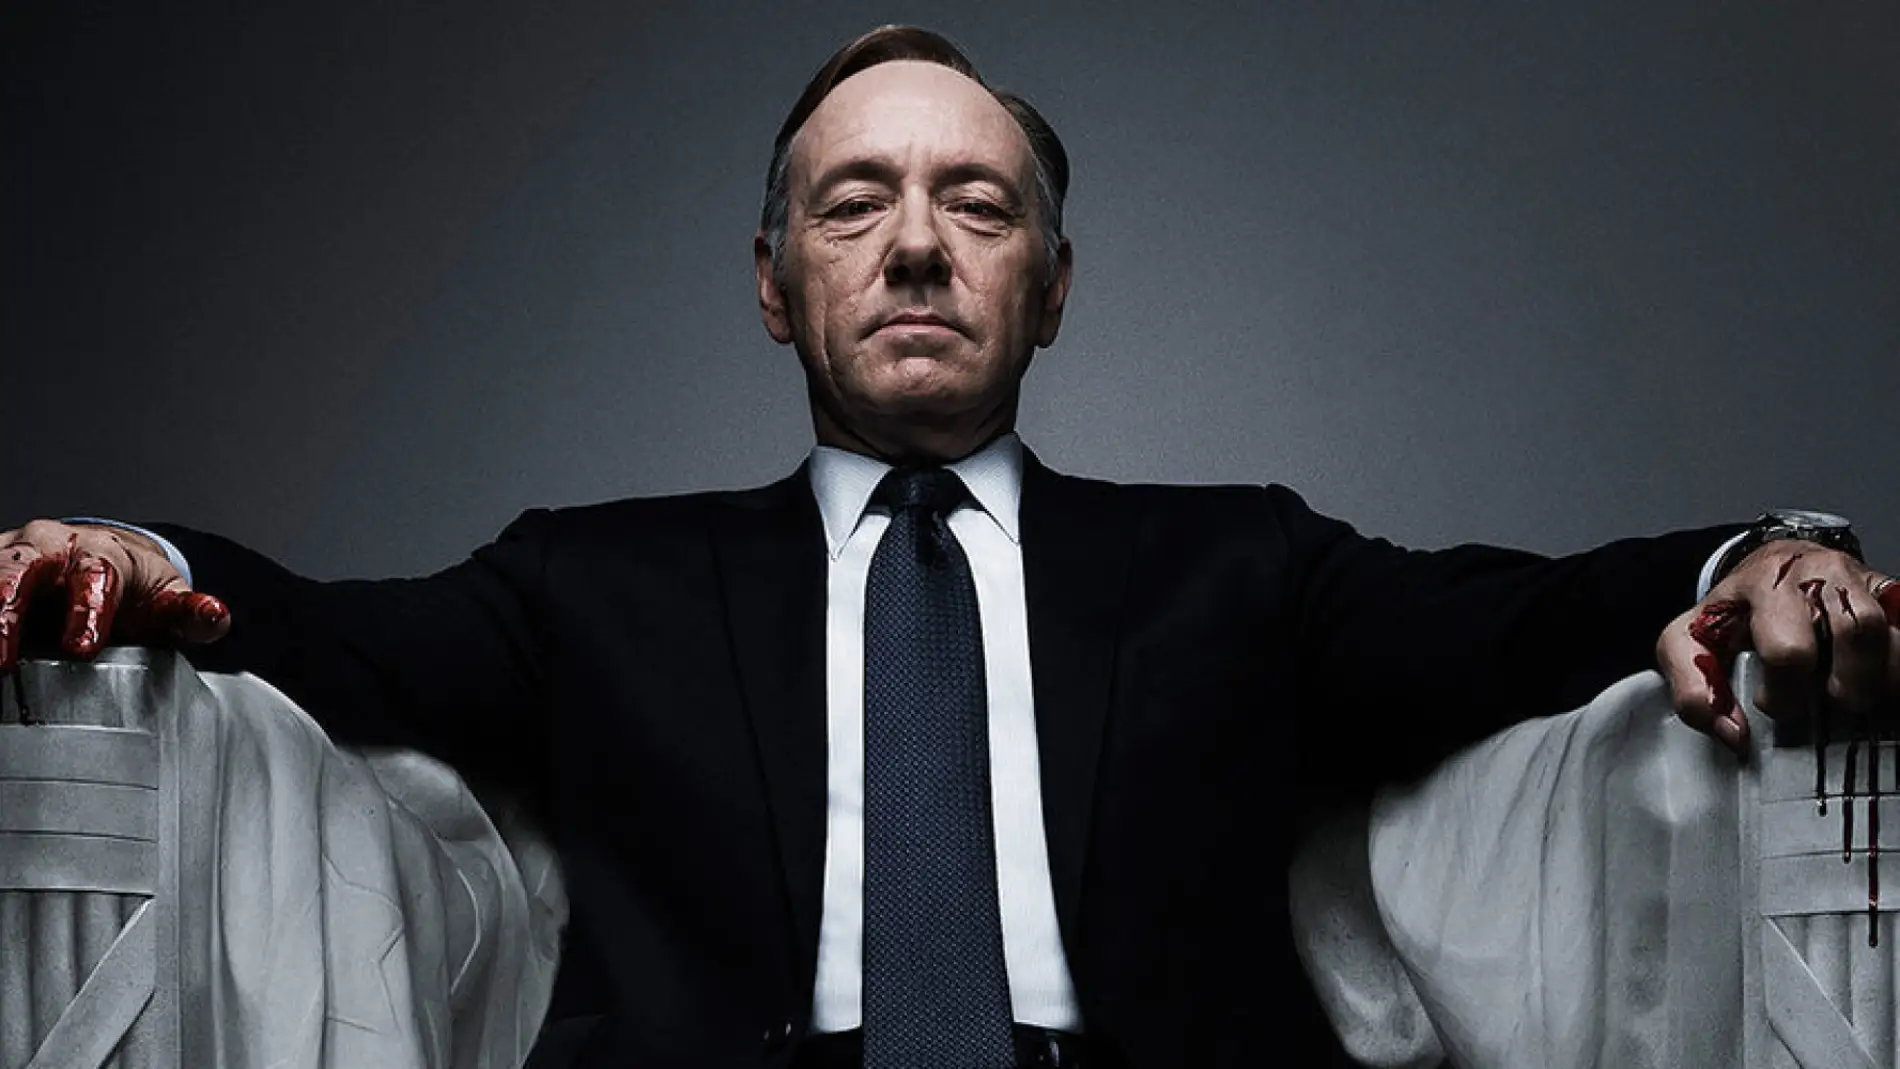 House of Cards, Frank Underwood